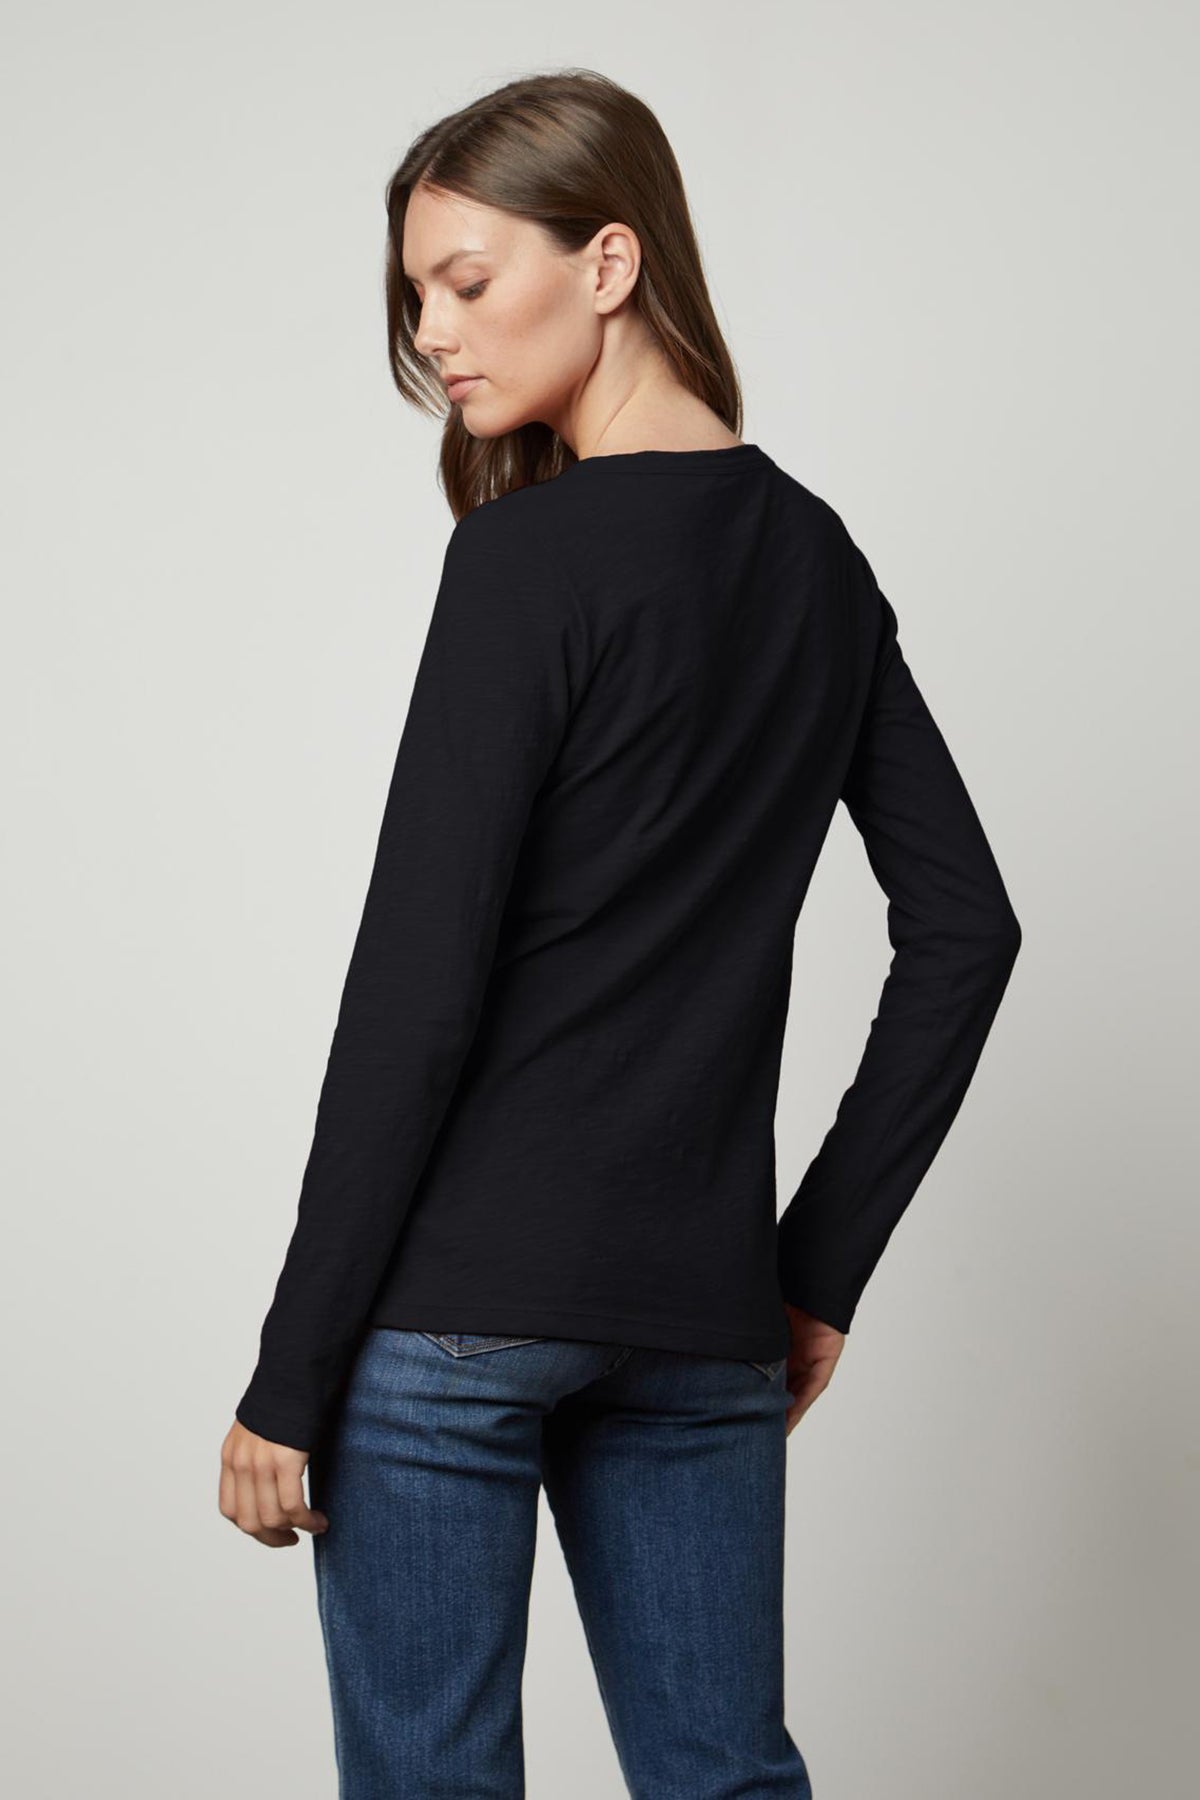   The back view of a woman wearing jeans and a black LIZZIE ORIGINAL SLUB LONG SLEEVE TEE made by Velvet by Graham & Spencer, made of cotton. 